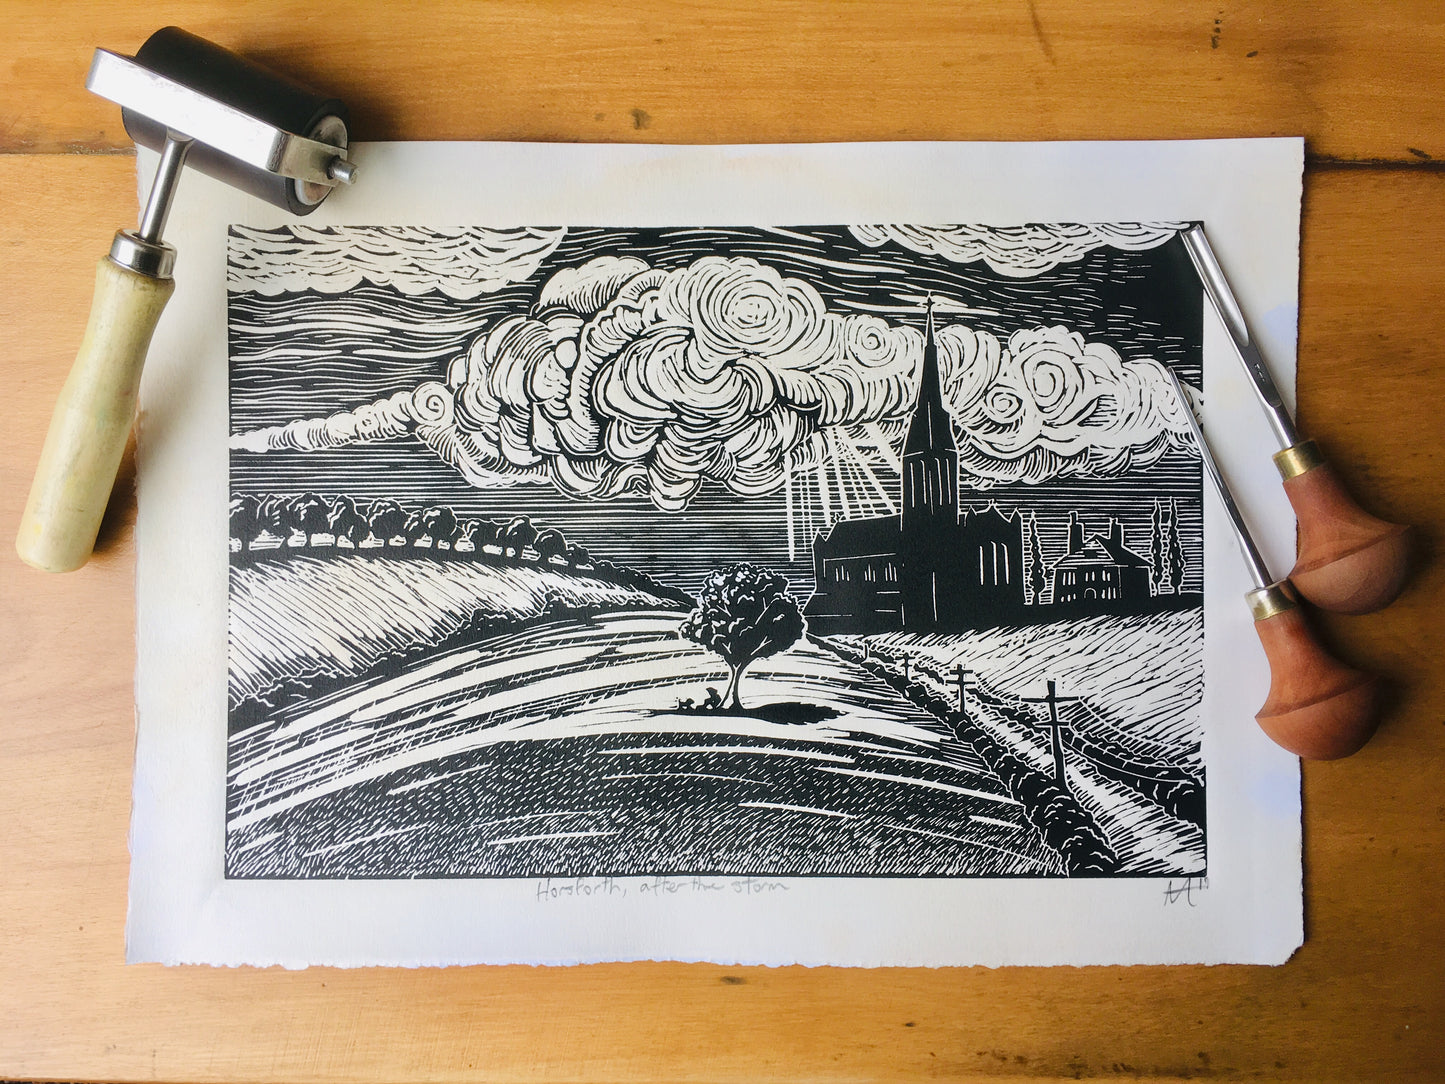 "Horsforth, After the Storm" Print